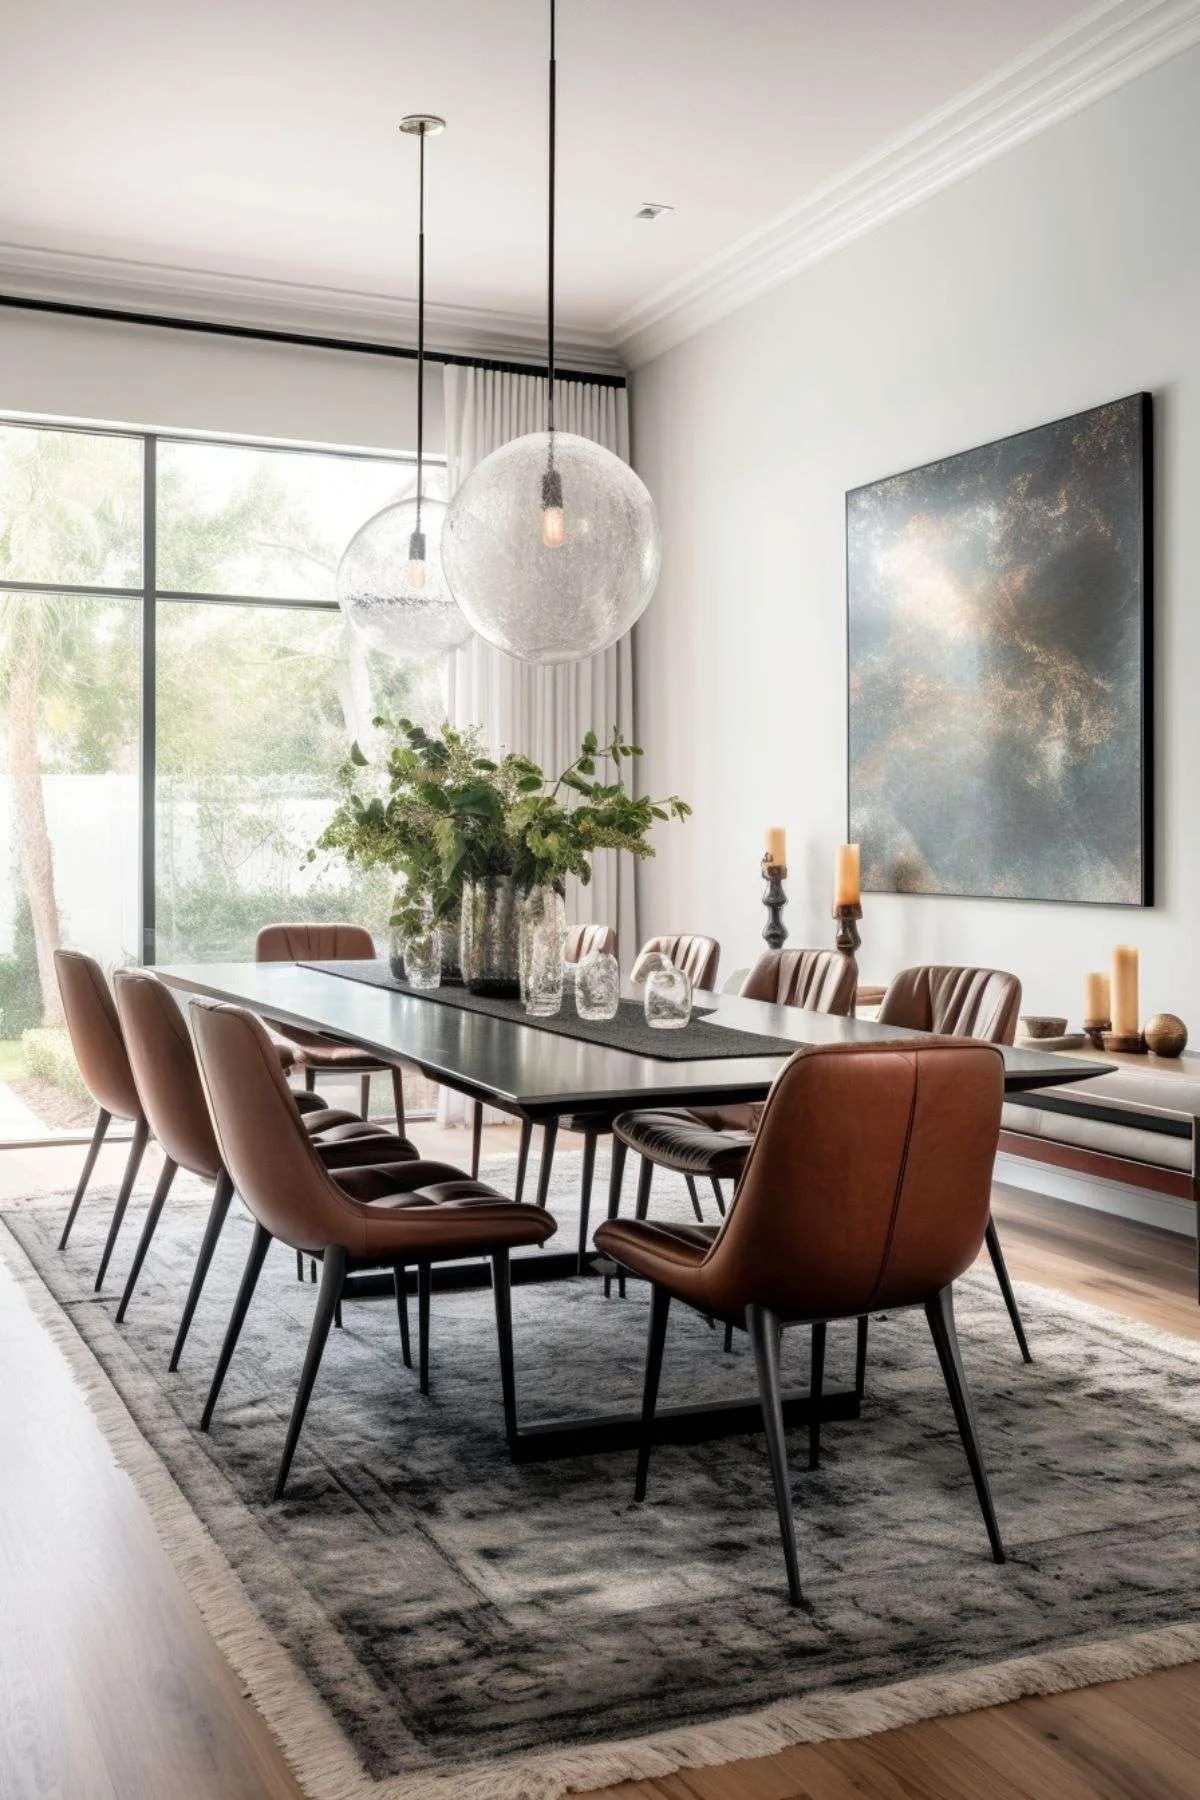 Dining Room Decor: 11 Essentials for a Beautiful Space